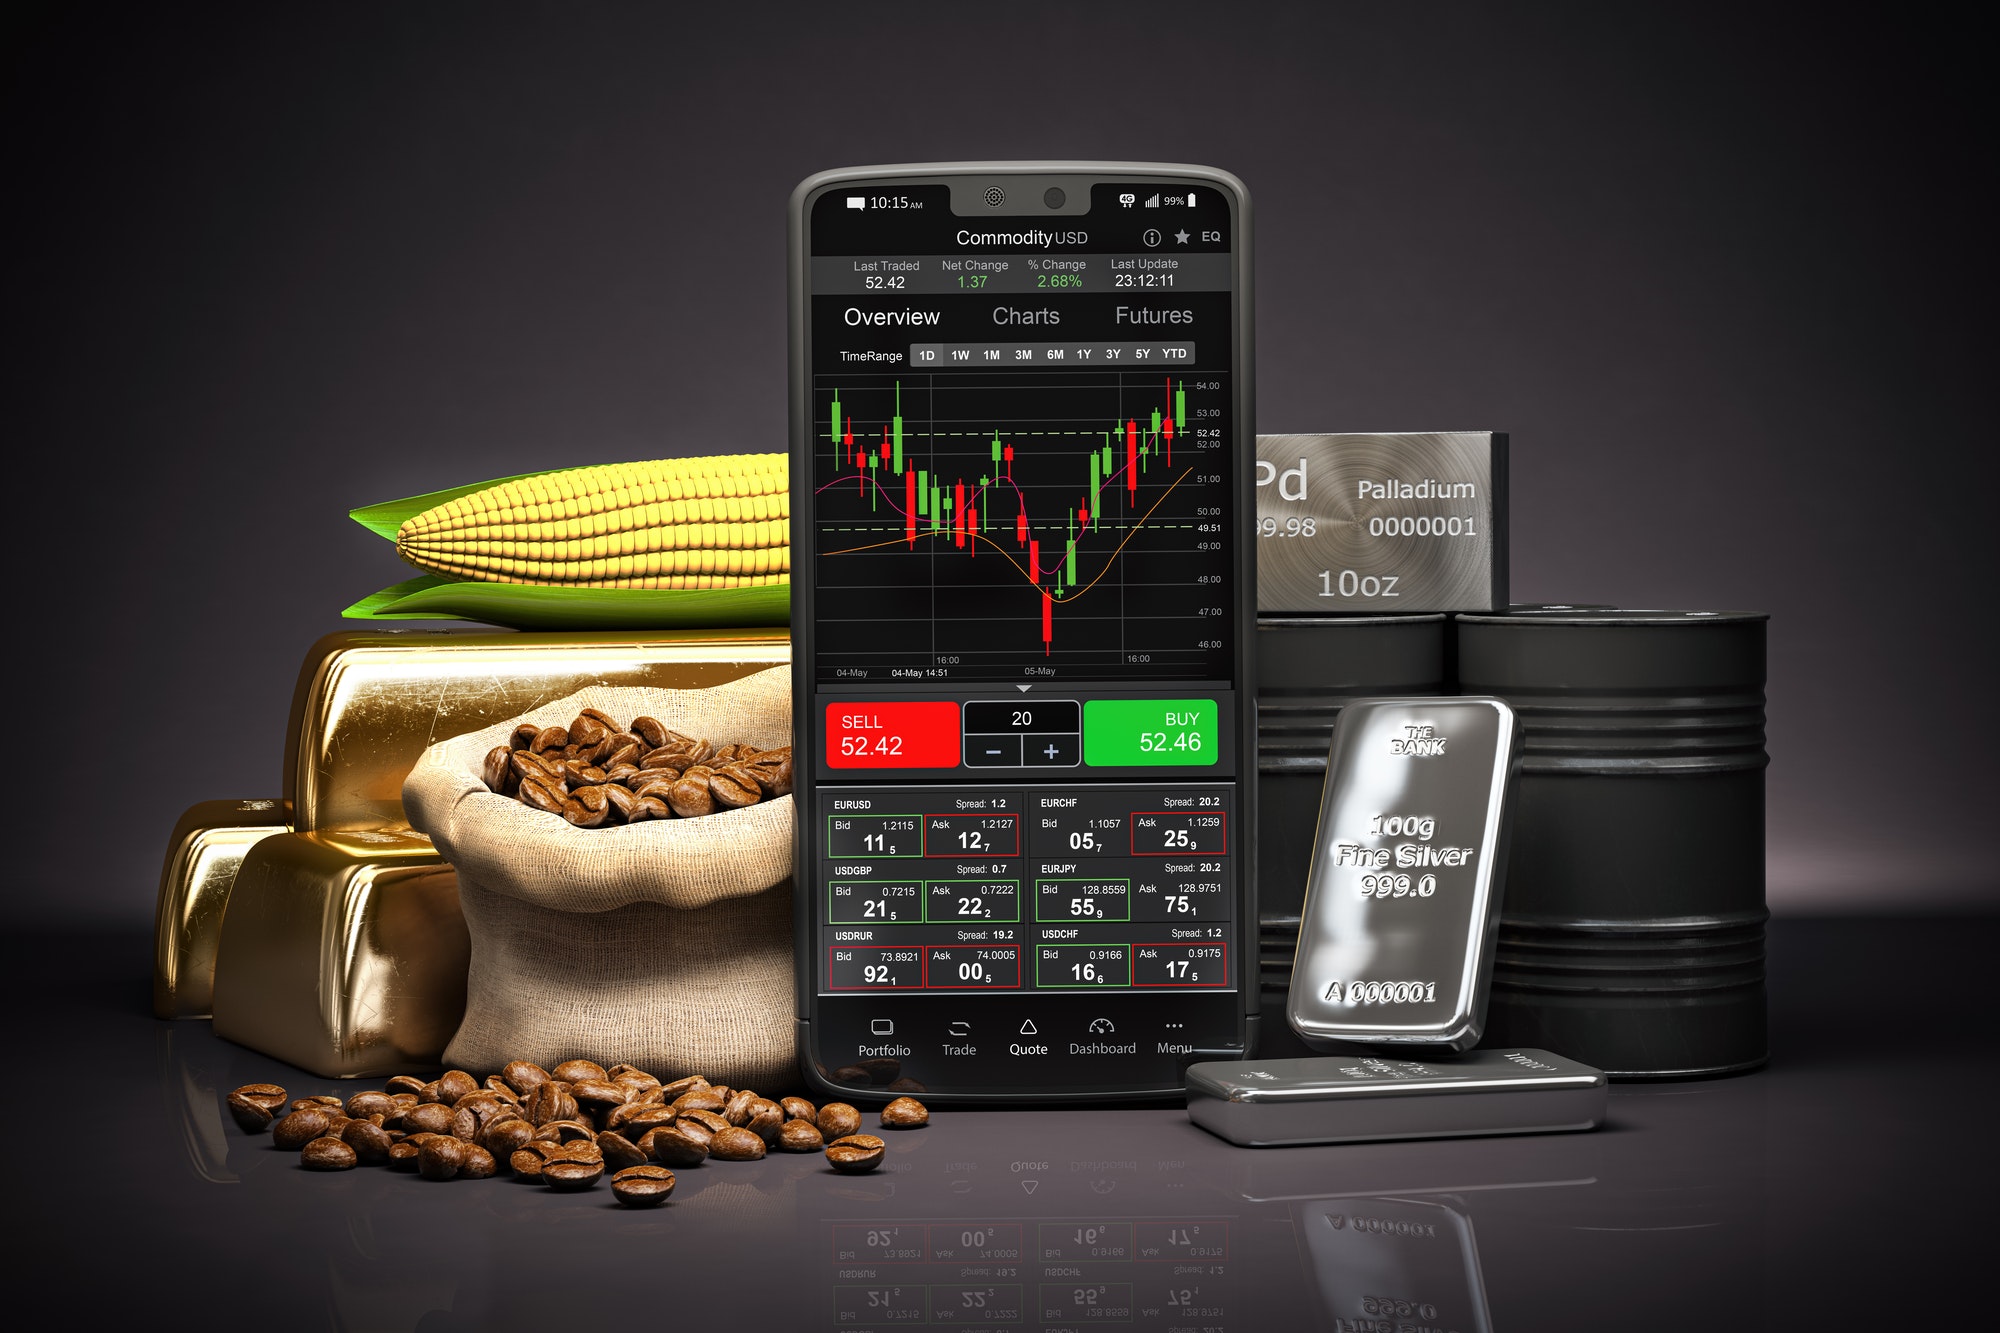 Mobile phone with commodities. Stock exchange market trading platform on the screen of smartphone .